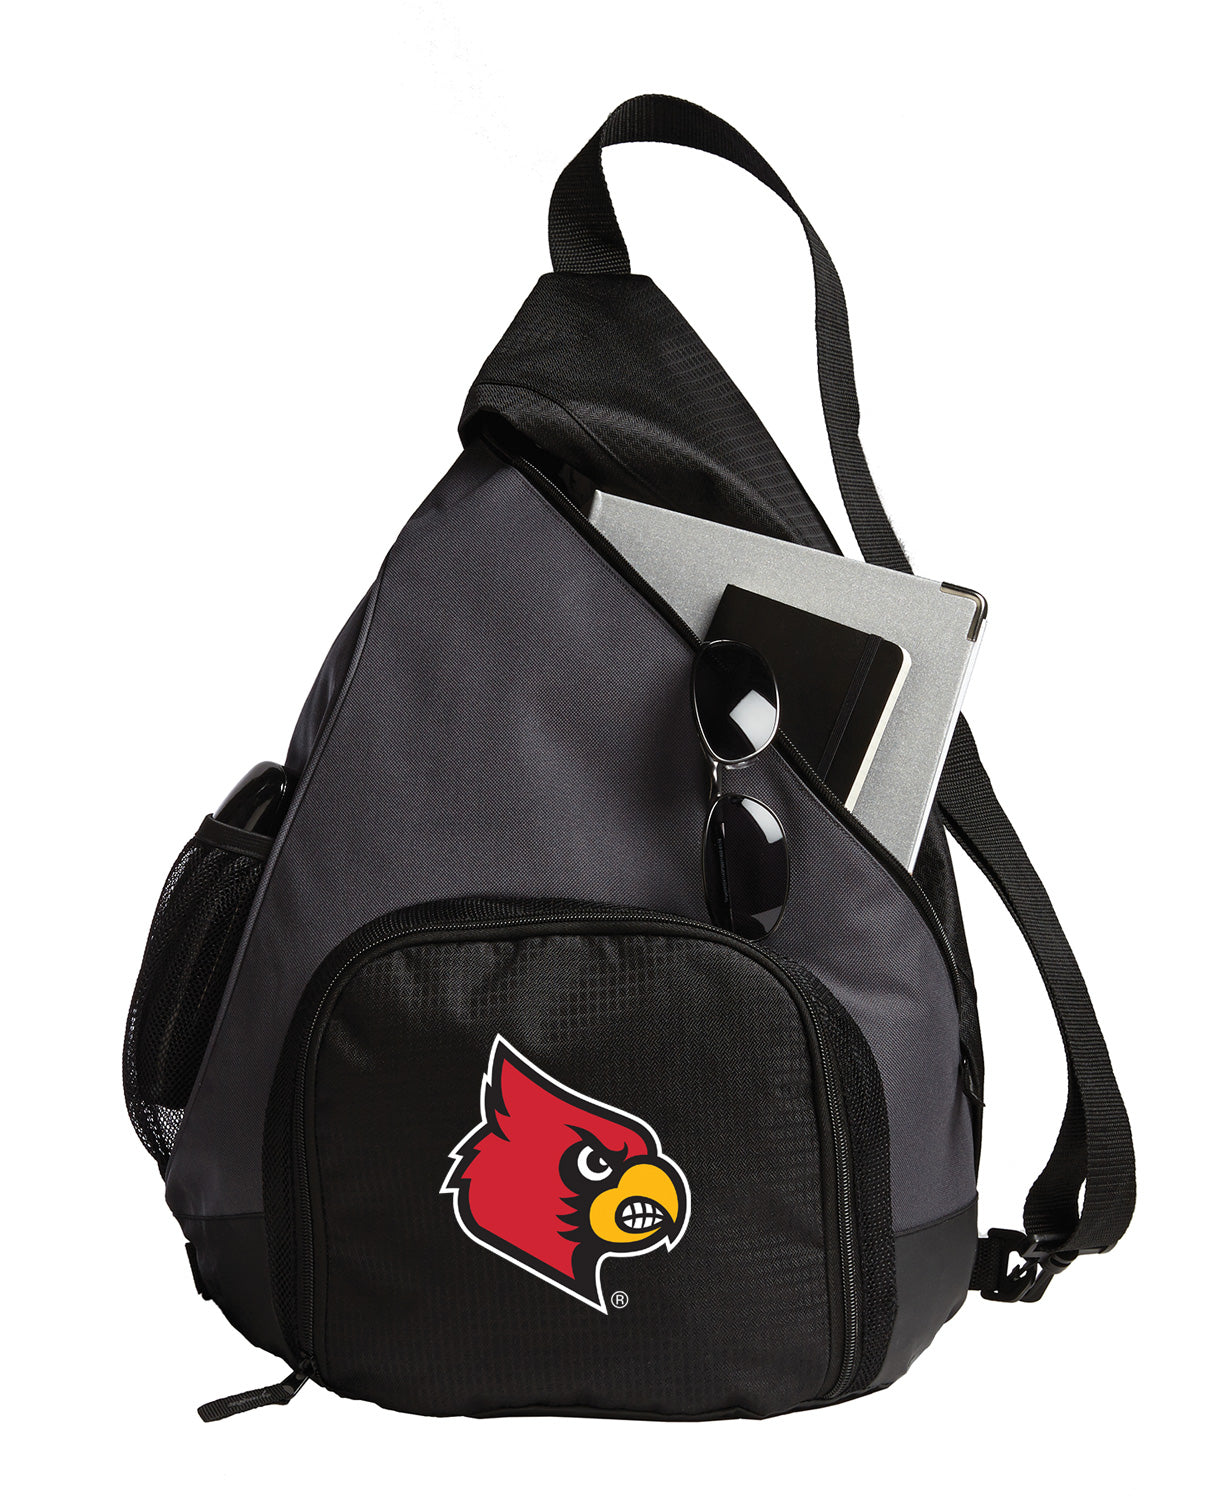 University of Louisville Sling Backpack Louisville Cardinals Bag with Soccer Ball or Volleyball Bag Sports Gear Compartment Practice Bag